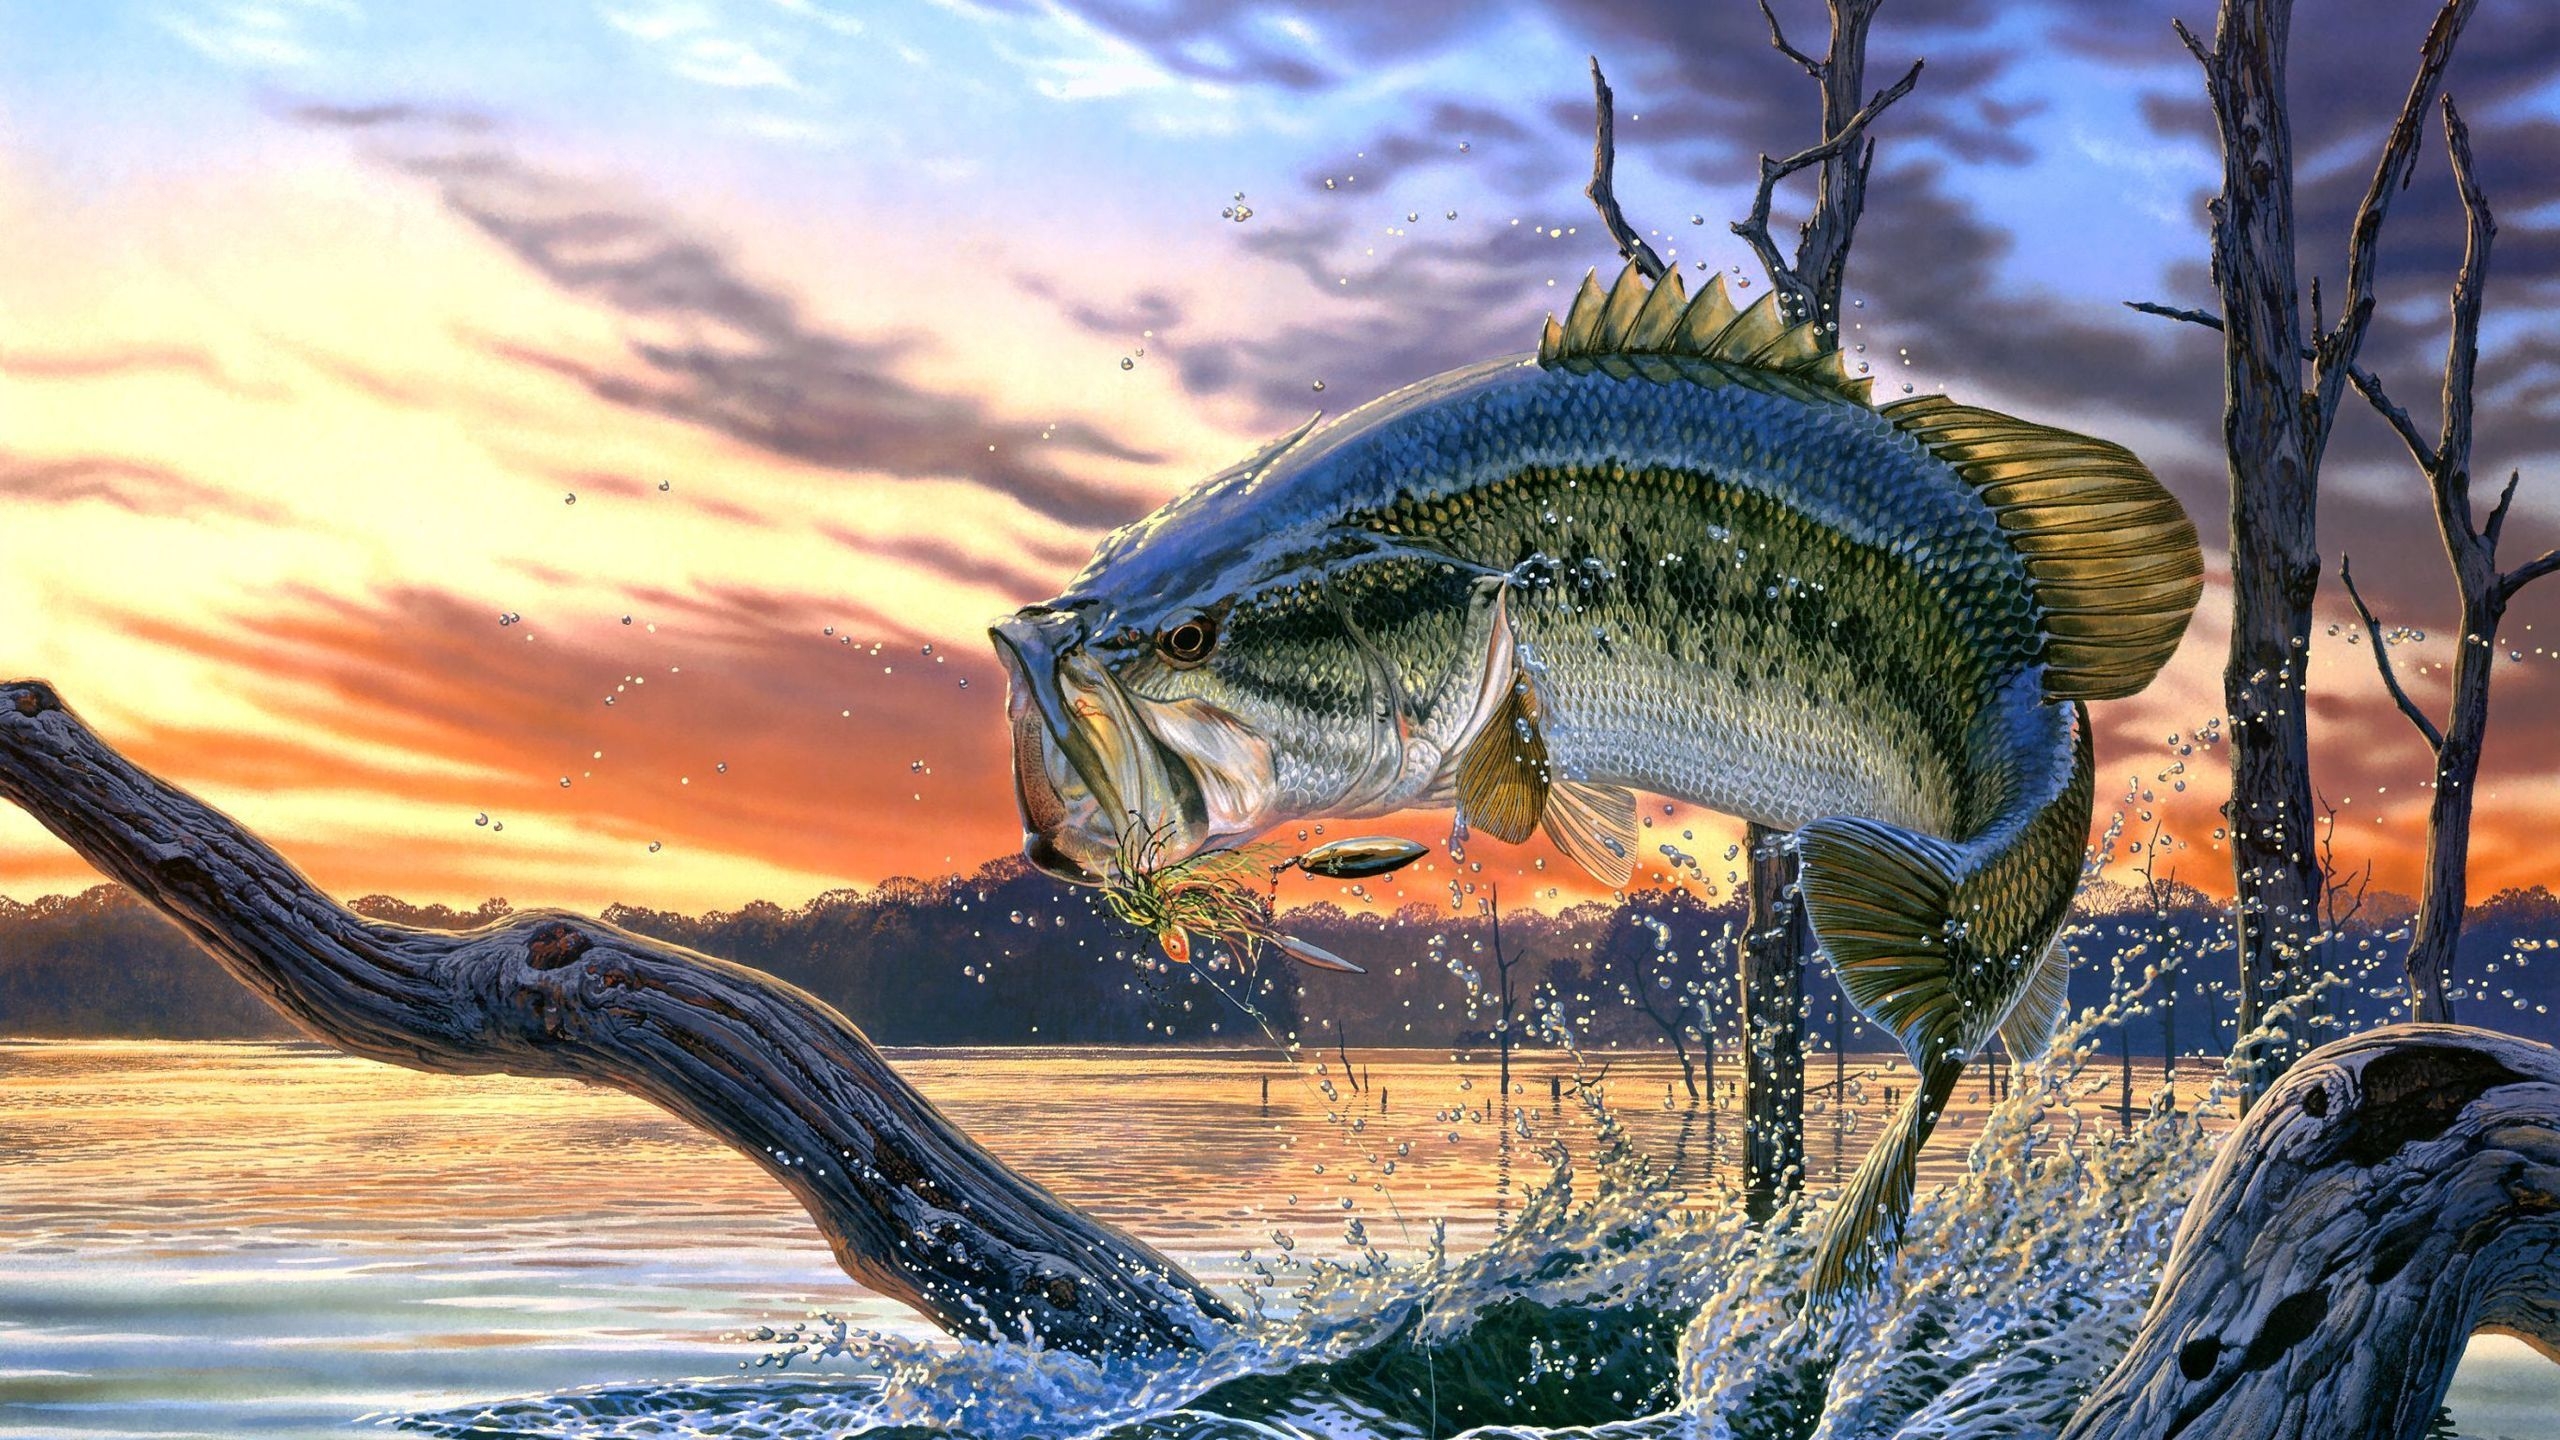 Fantasy Scary Fish for 2560x1440 HDTV resolution